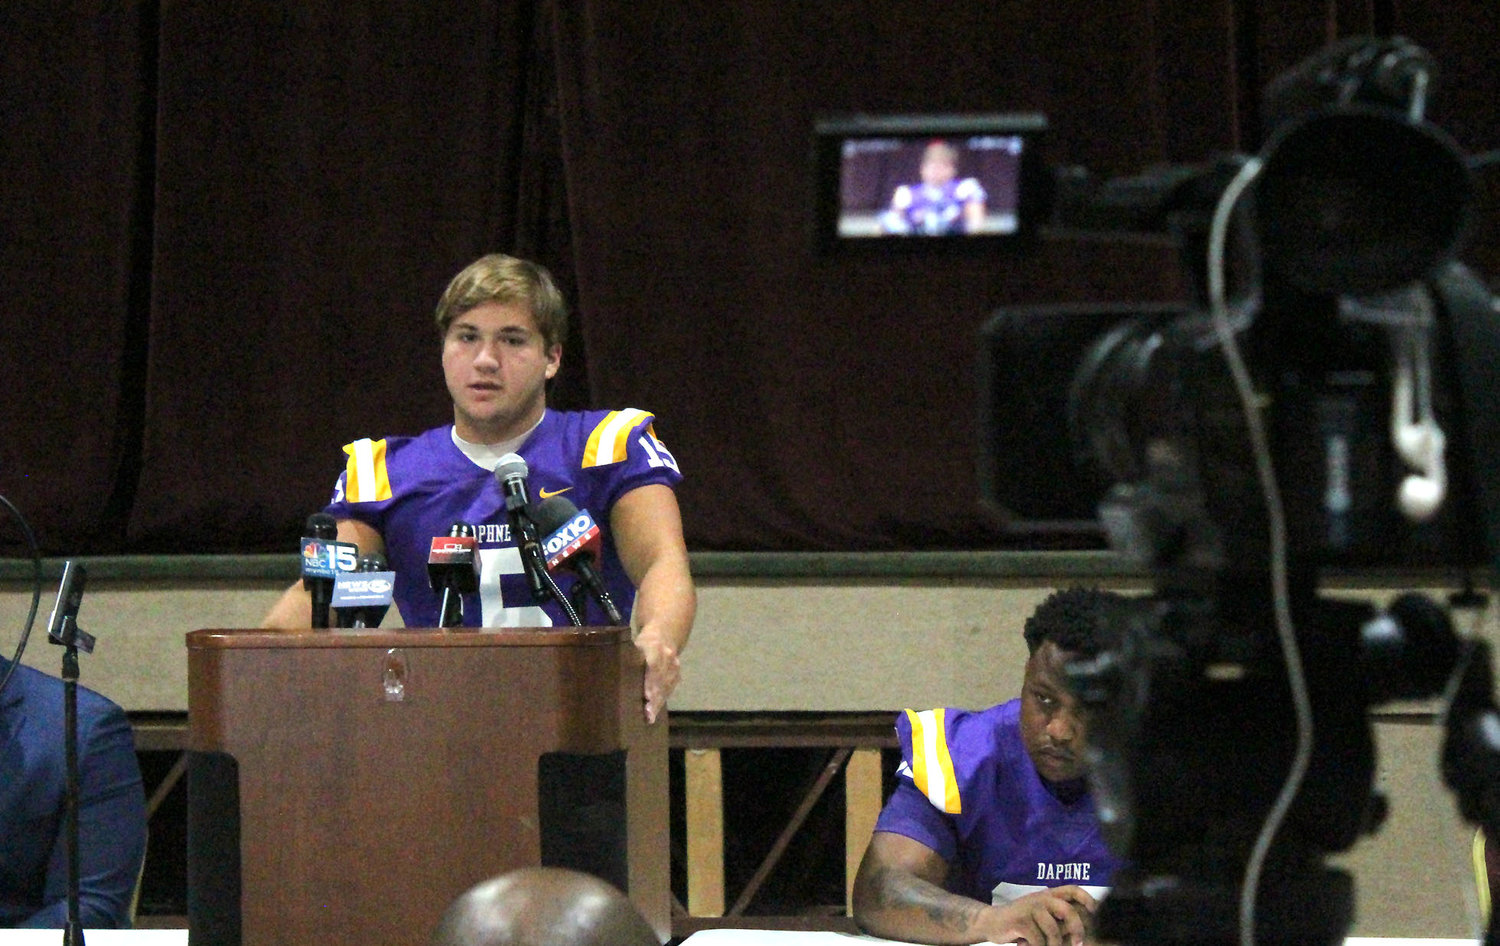 Daphne senior Garrett Childress was one of the local football players who answered questions from reporters in Trojan Hall during the Baldwin County Media Day event July 13.